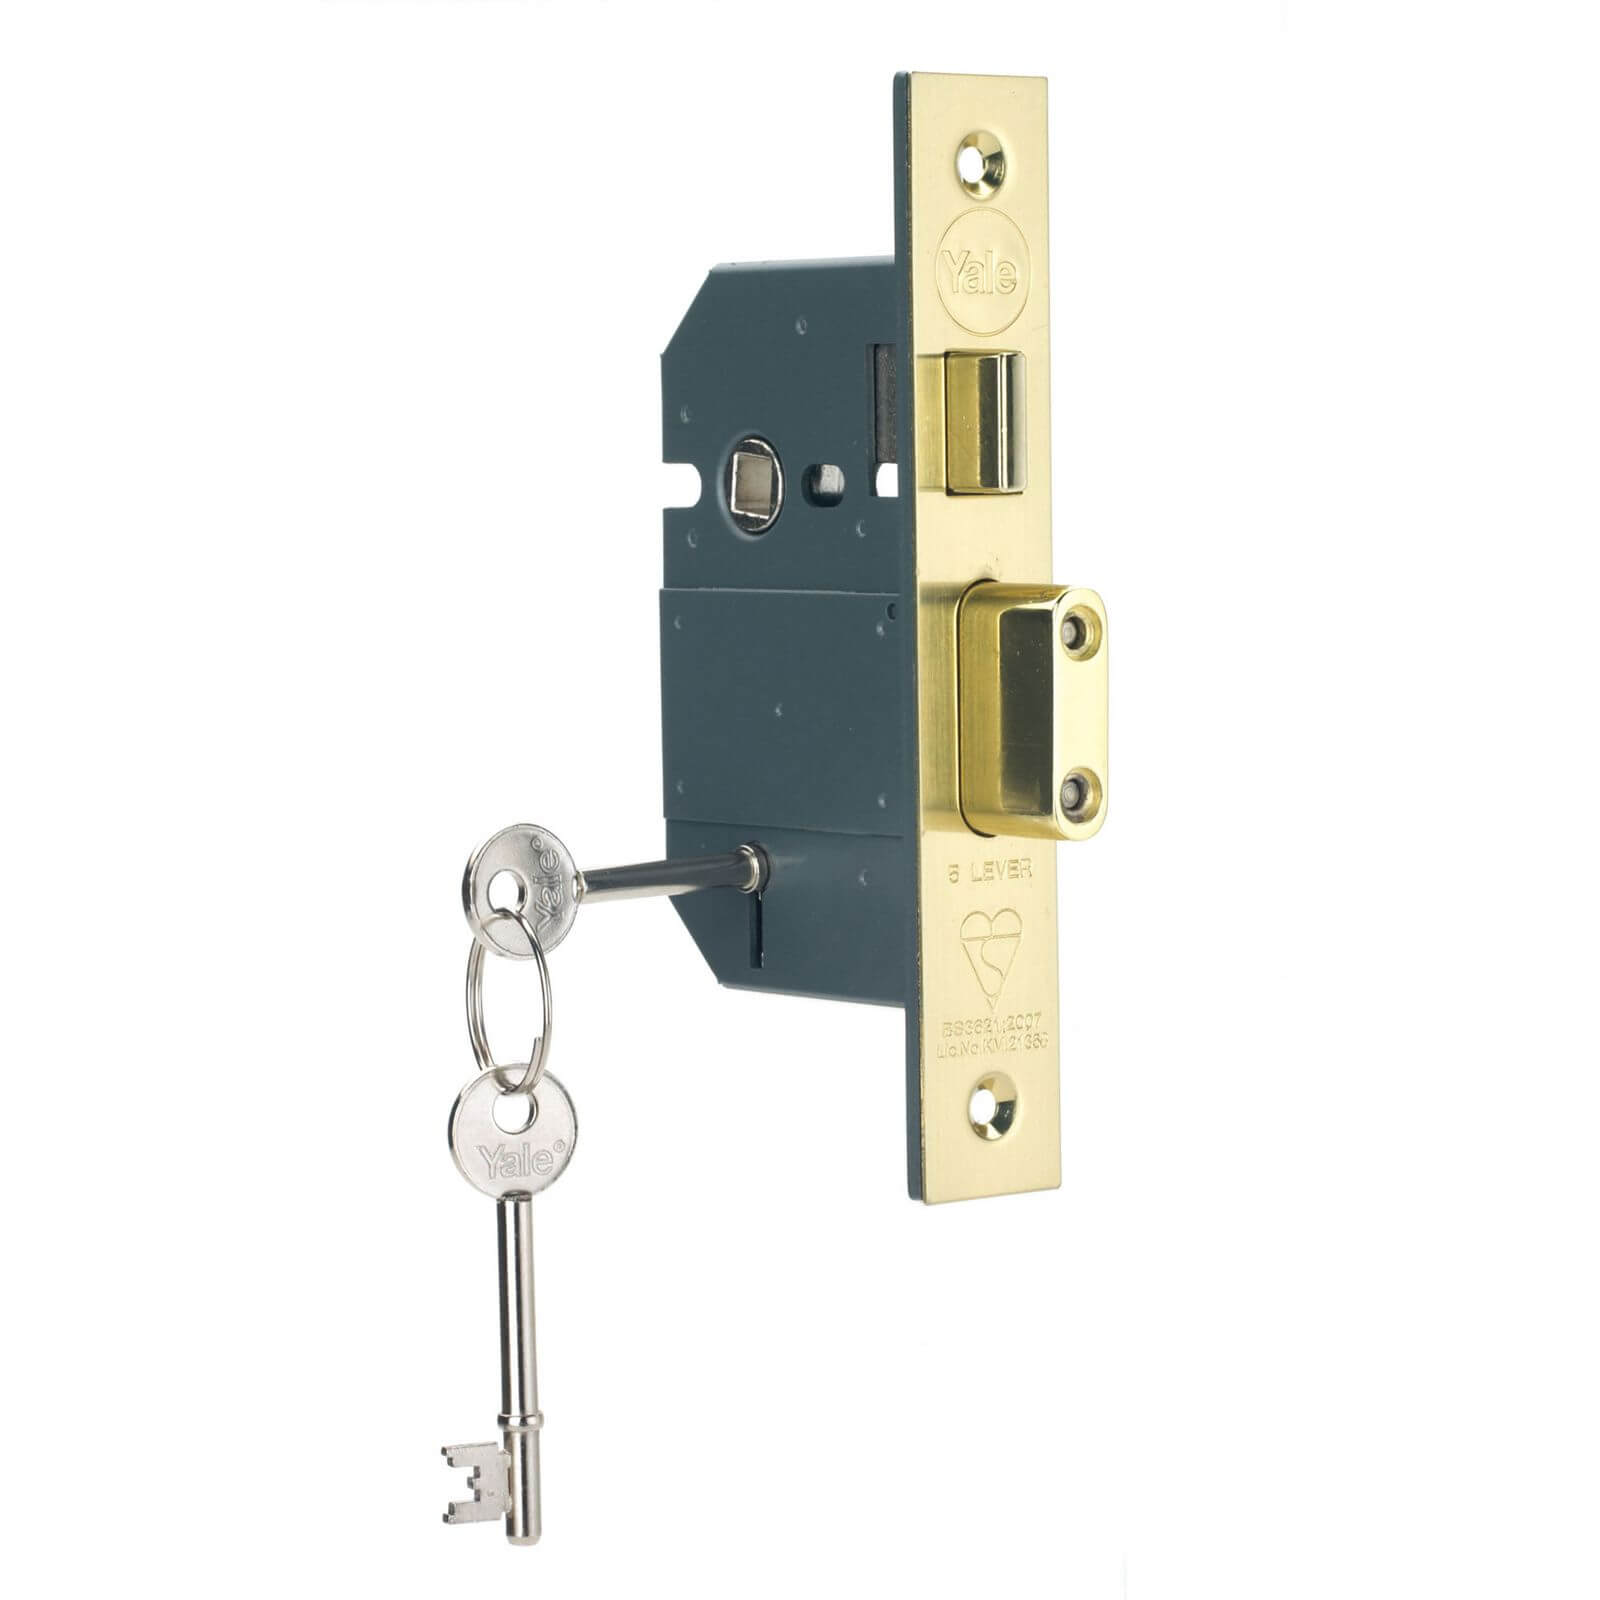 Photo of Yale Pm560 British Standard Bs3621 5 Lever 64mm - Brass